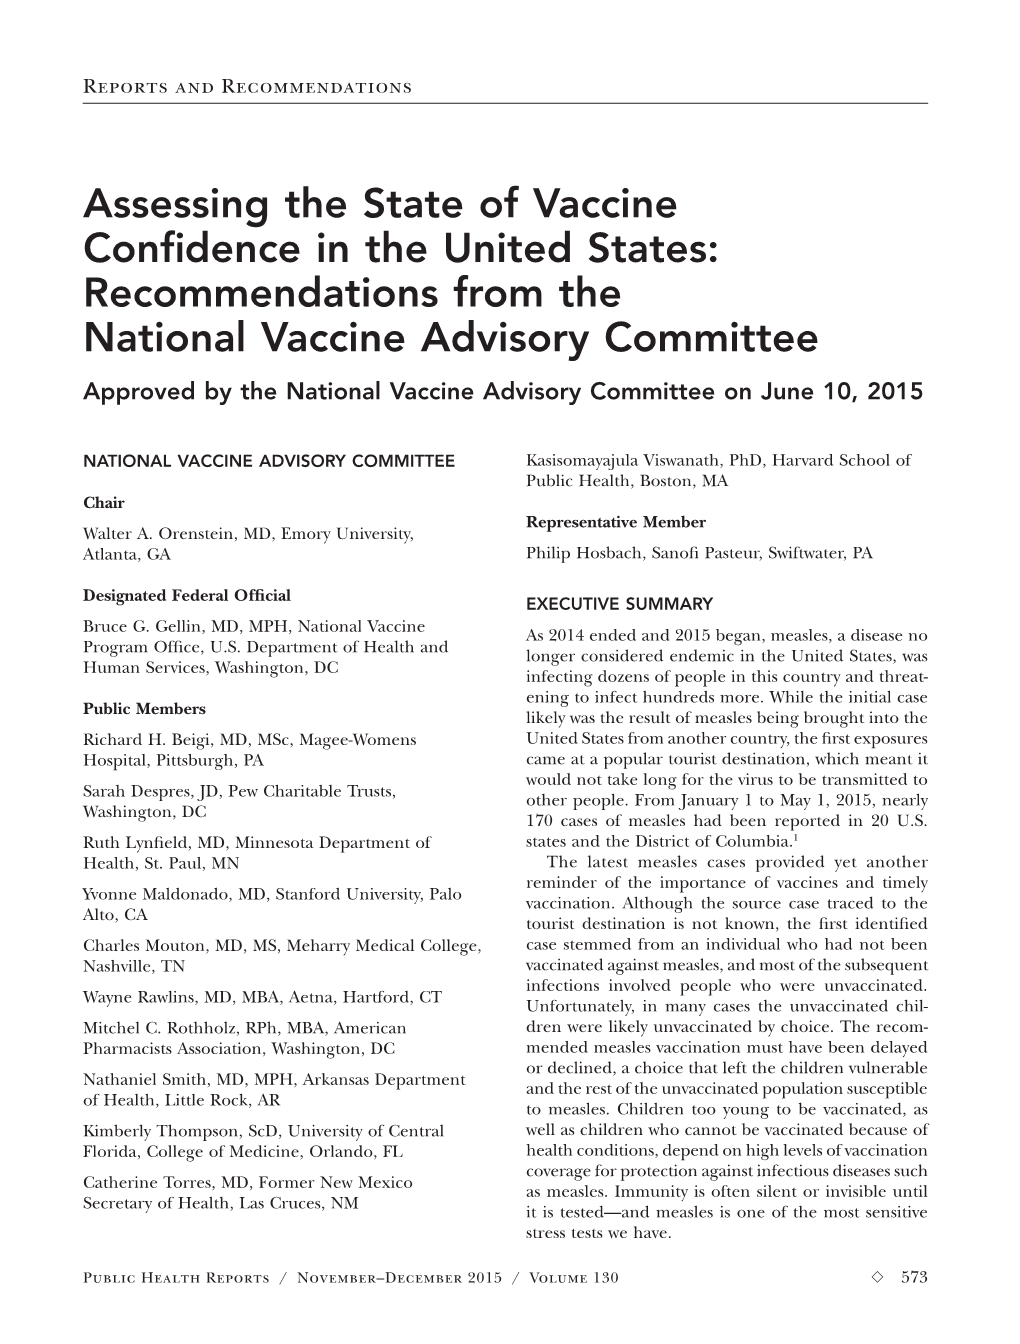 Assessing the State of Vaccine Confidence in the United